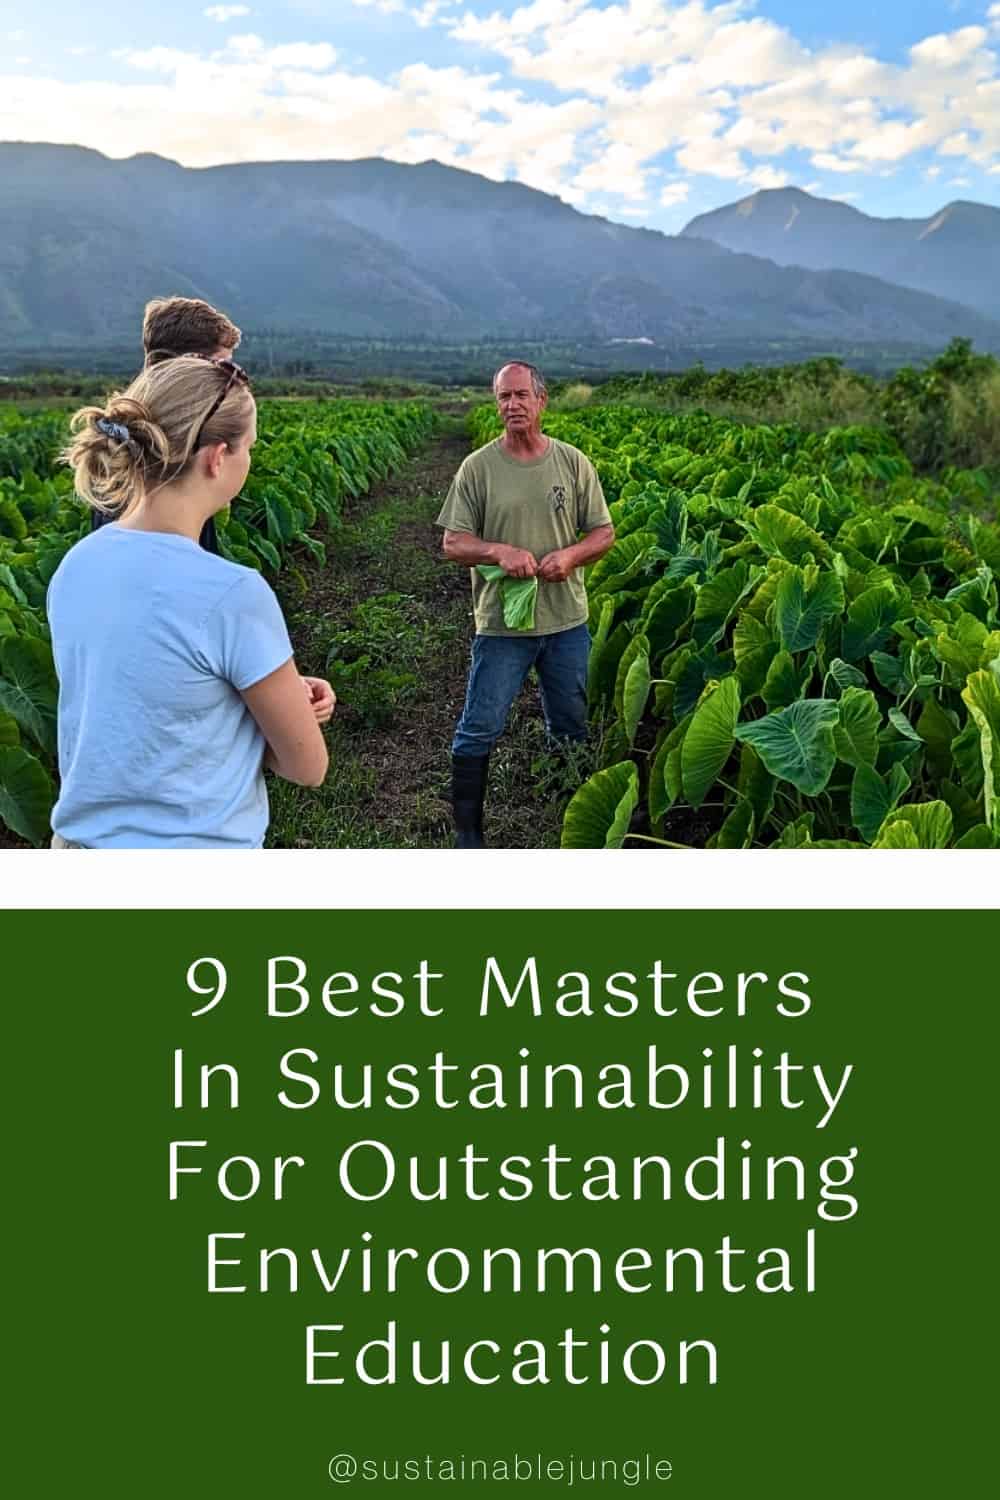 9 Best Masters In Sustainability For Outstanding Environmental Education Image by Arizona State University #master'sinsustainability #bestmaster'sinsustainability #sustainabilitymaster's #sustainabilitymaster'sprograms #bestsustainabilitymaster'sprograms #sustainablejungle